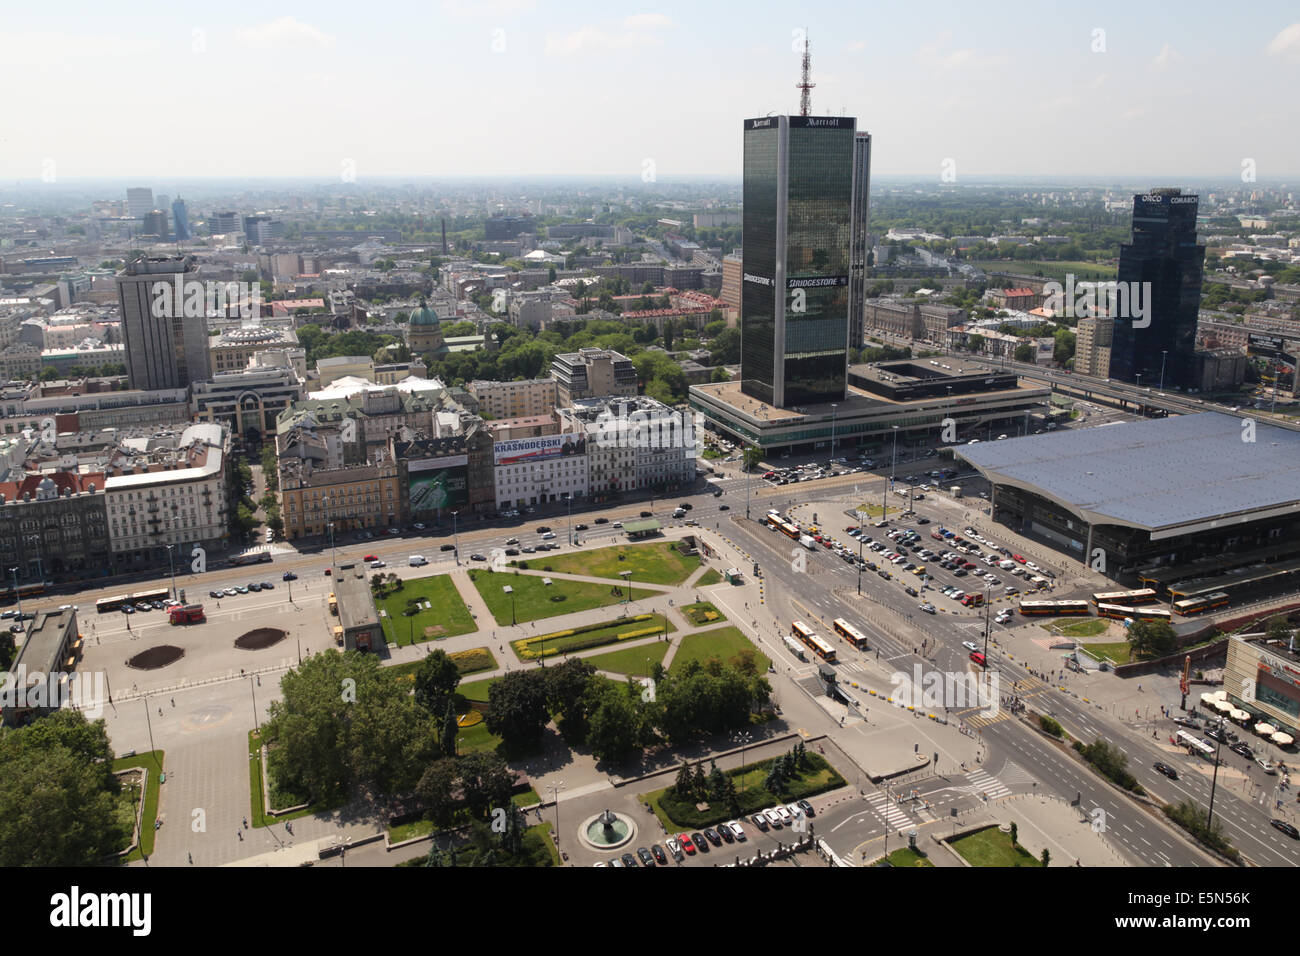 Views toward the Marriott Hotel and train station from the Palace of Science and Culture (Pałac Kultury i Nauki), Warsaw, Poland Stock Photo